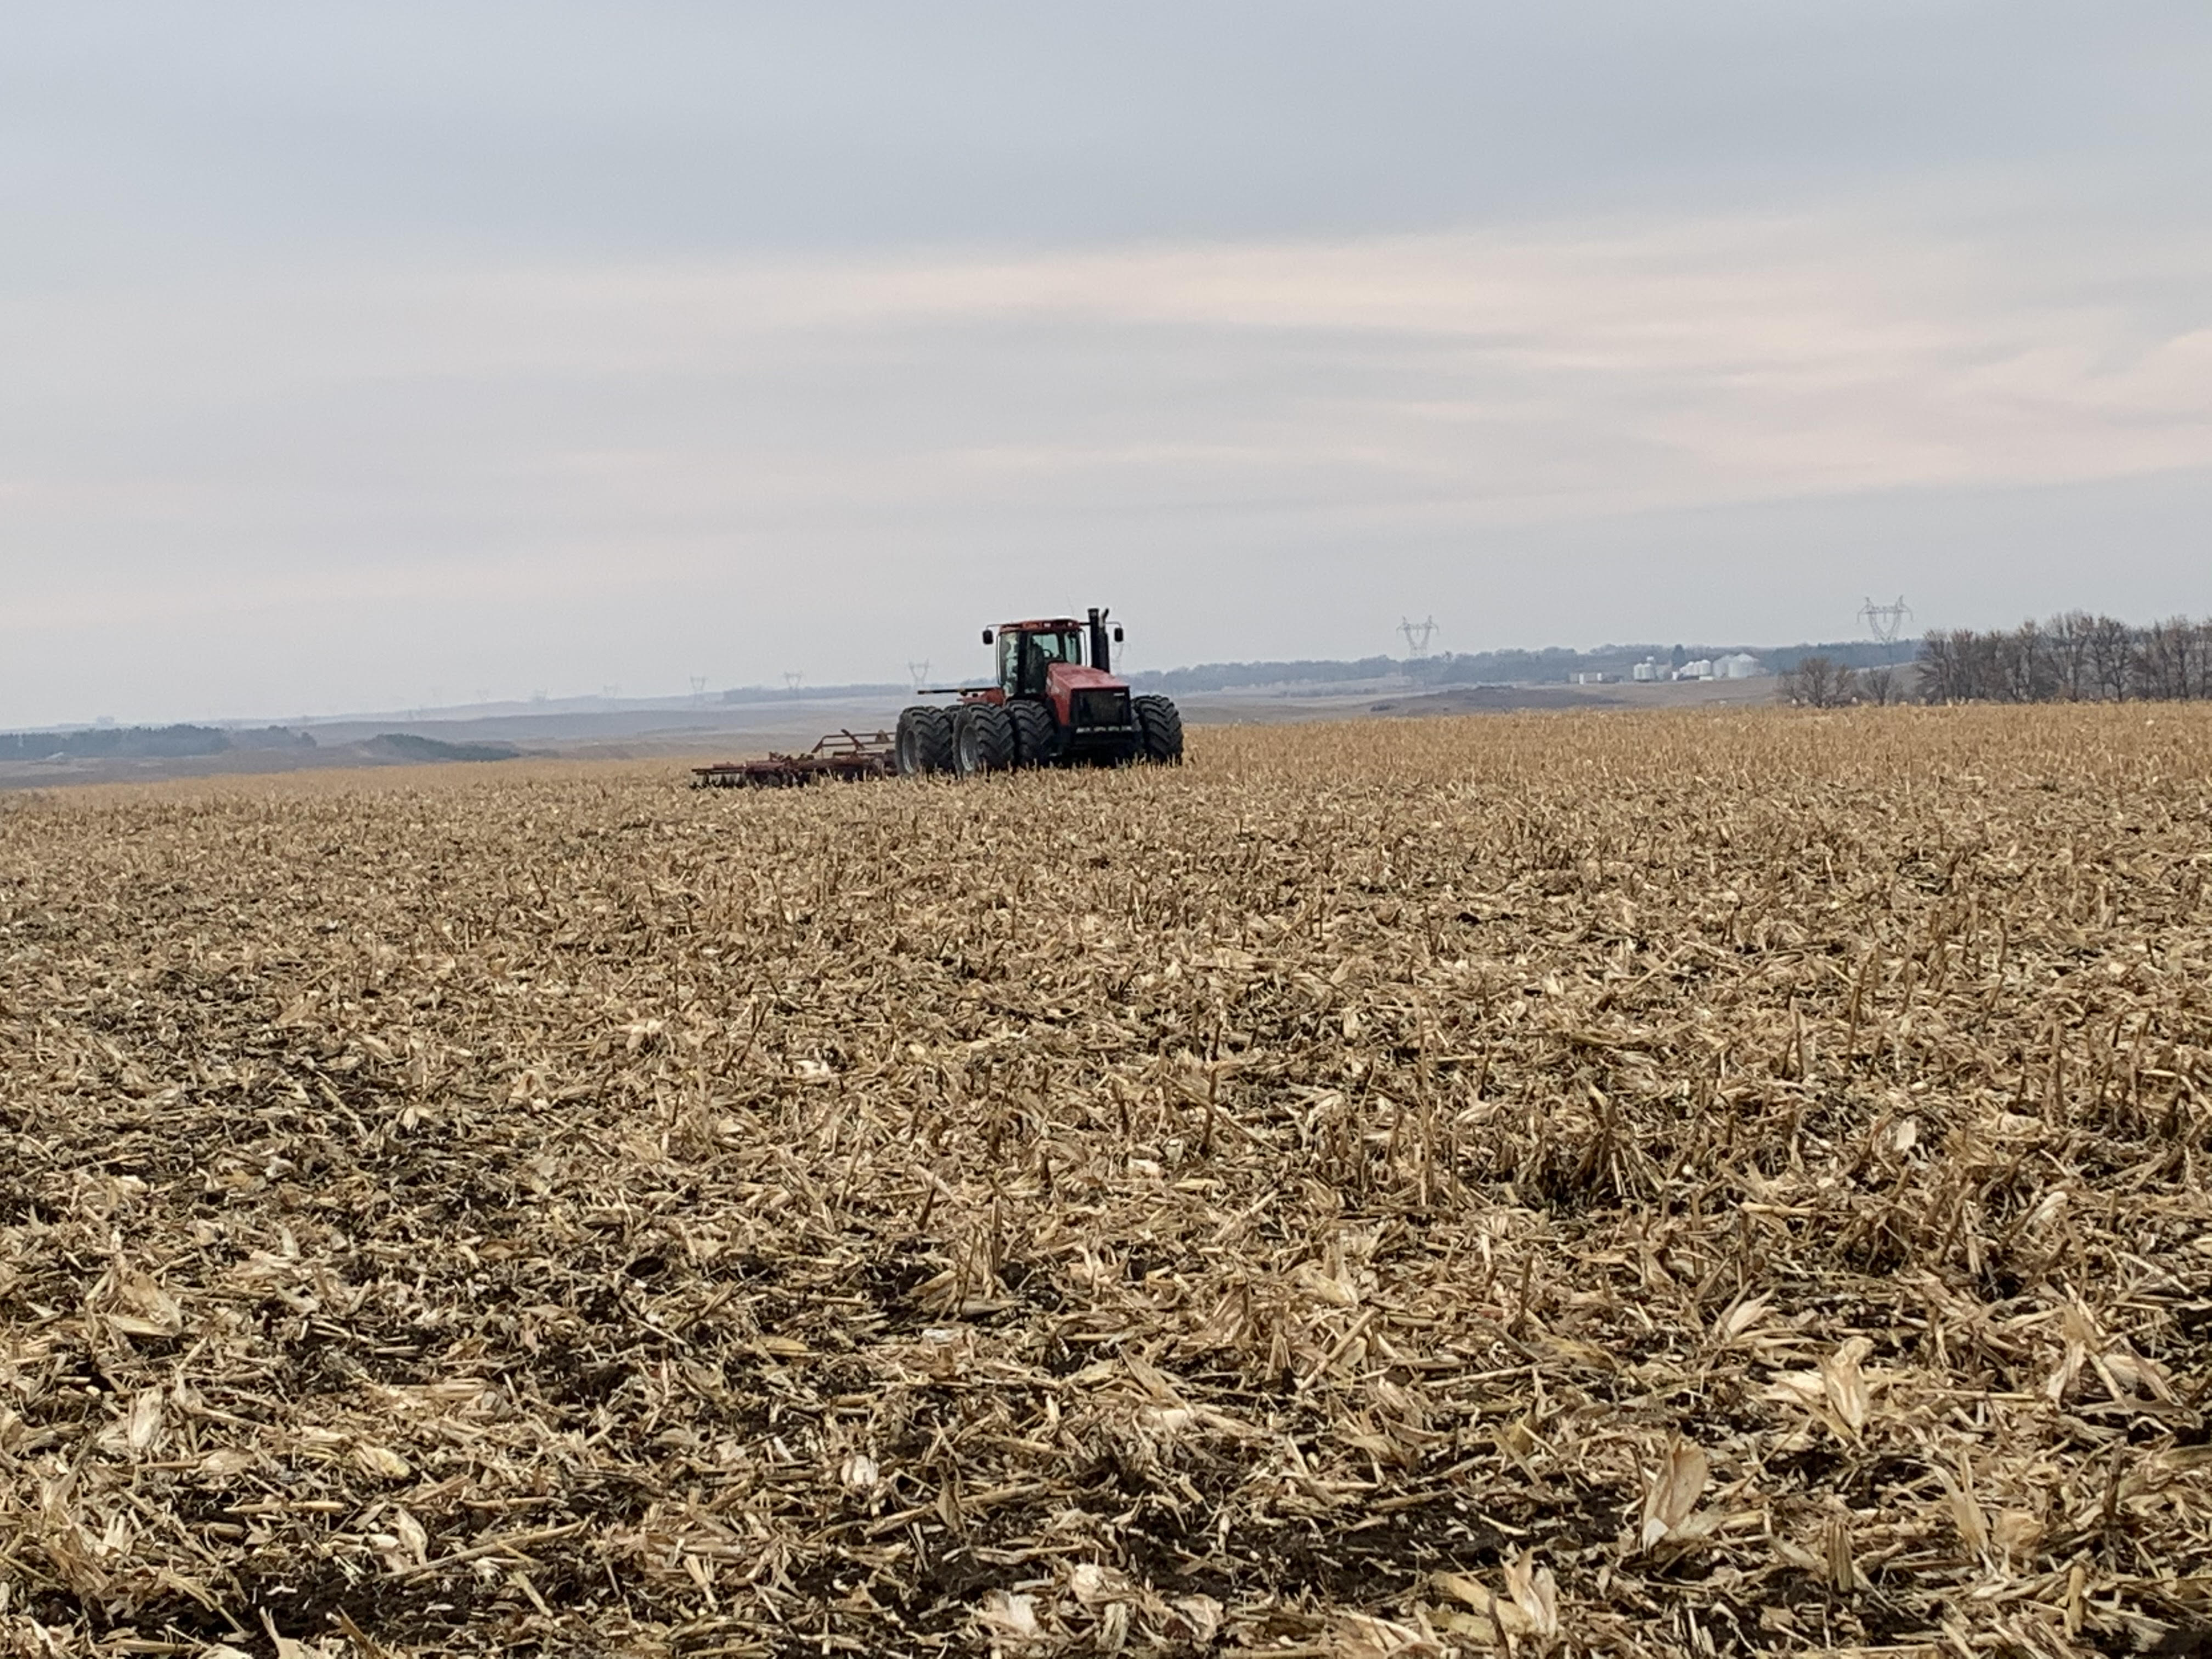 Afternoon Ag News, February 23, 2022: Ag tractor sales in the U.S. and Canada rising into January